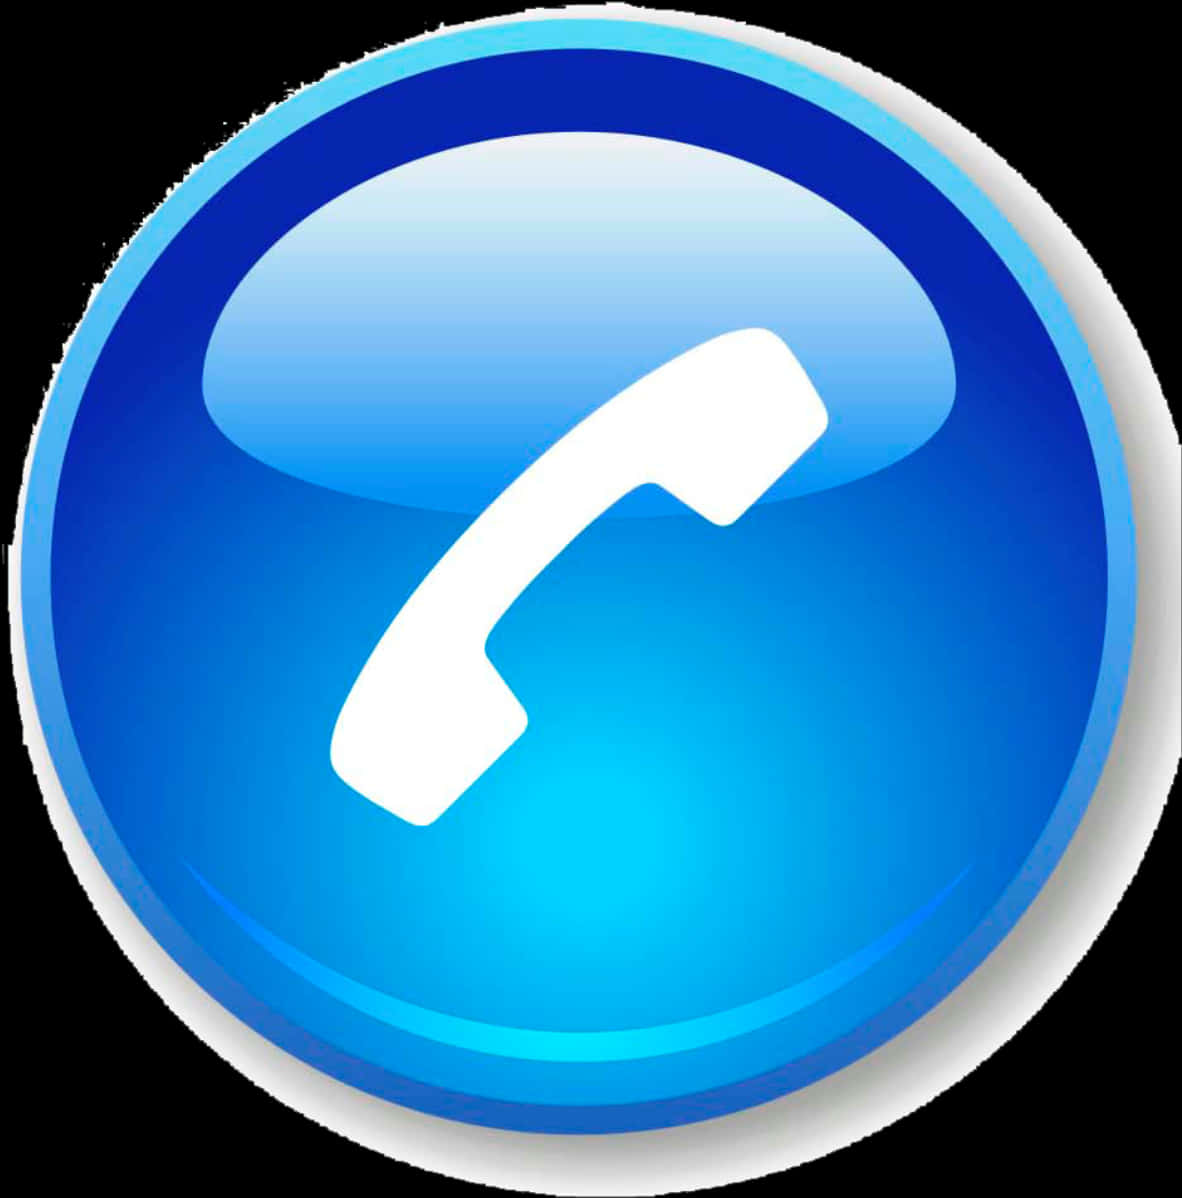 A Blue Button With A White Phone Icon